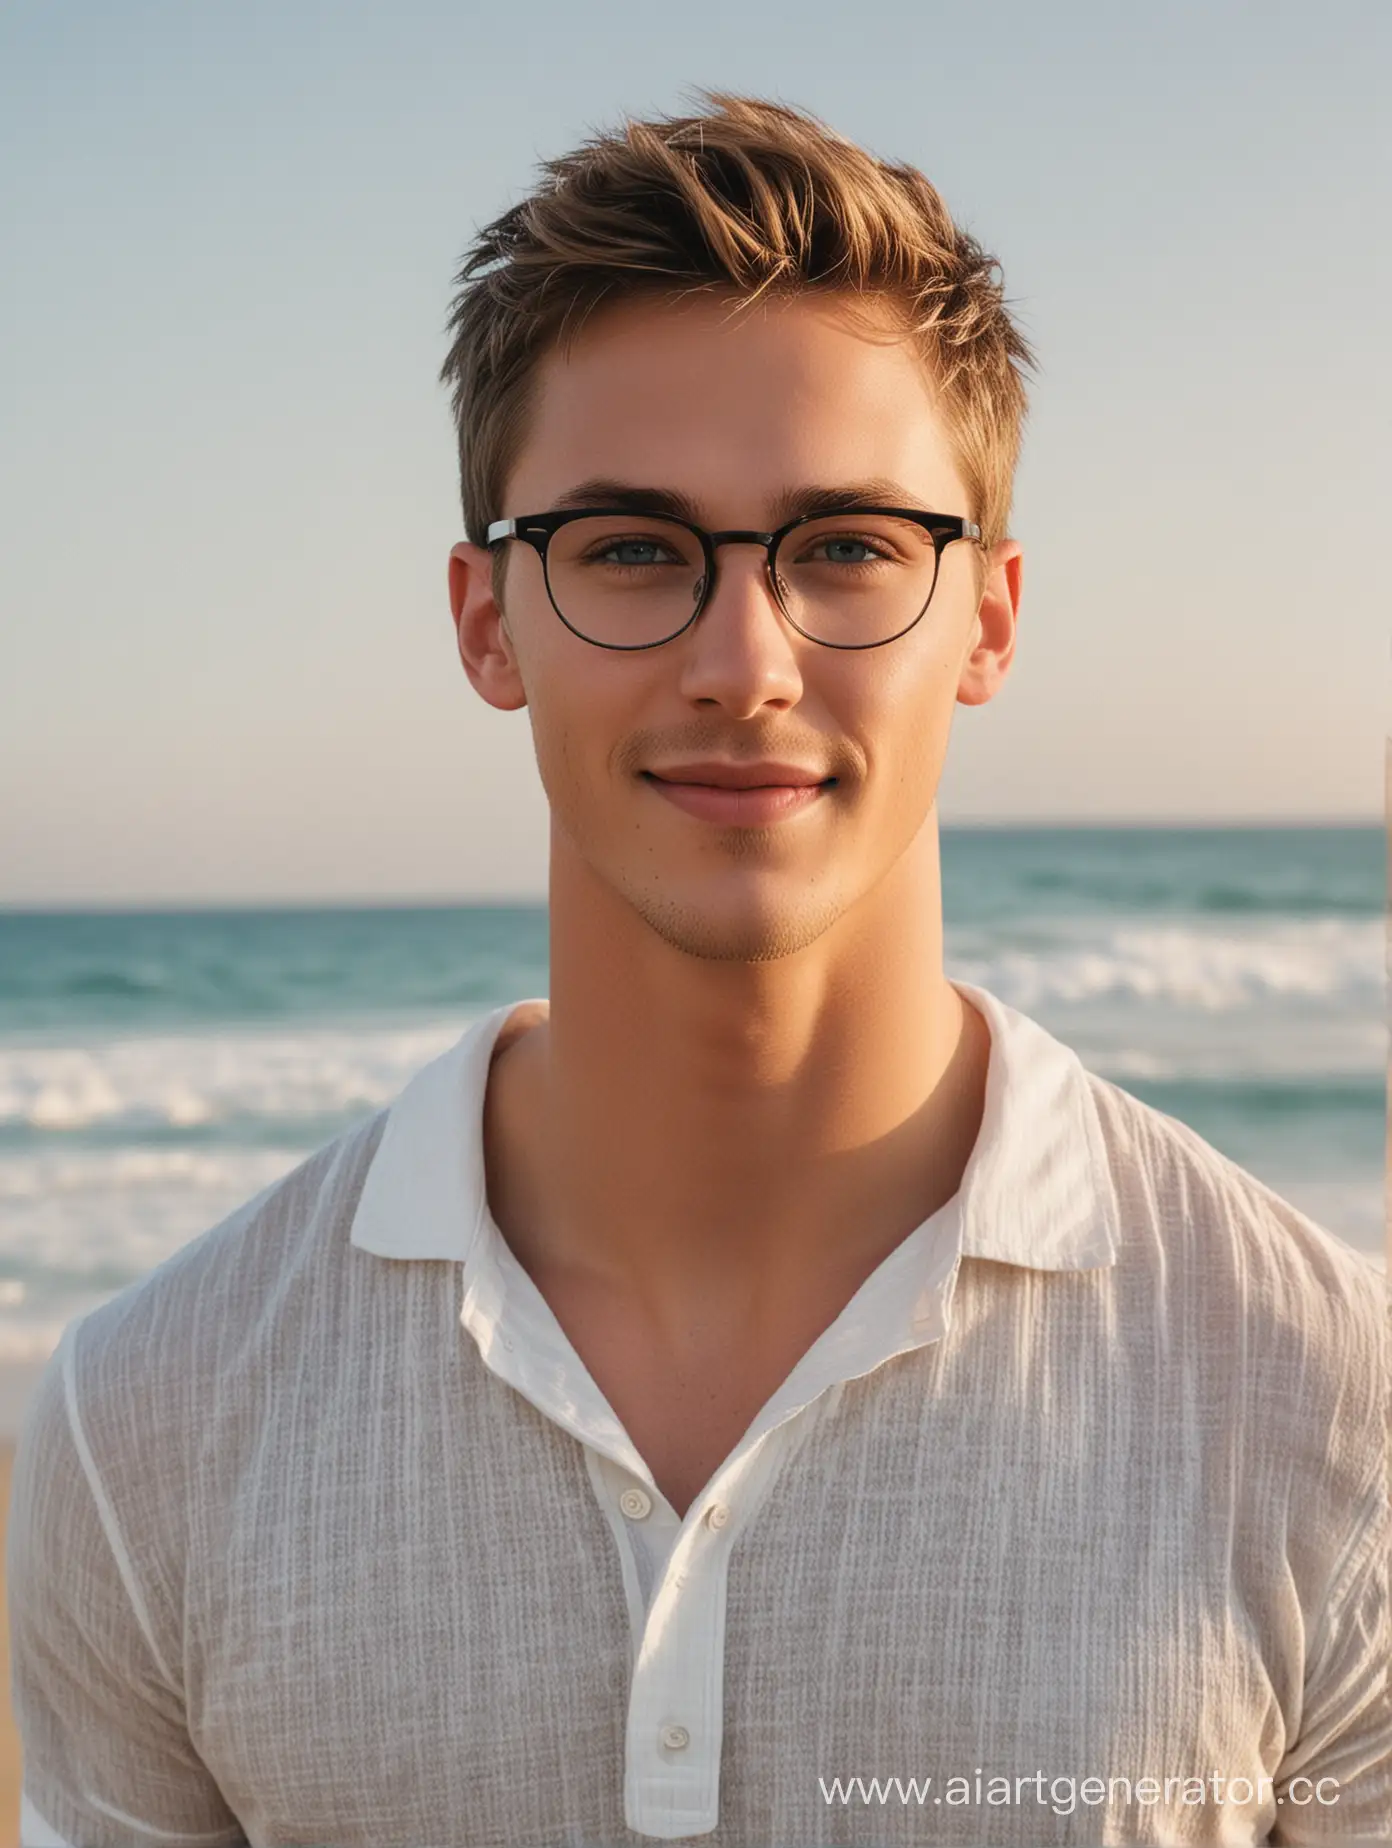 Handsome-Blond-Student-with-Glasses-Smiling-at-Beach